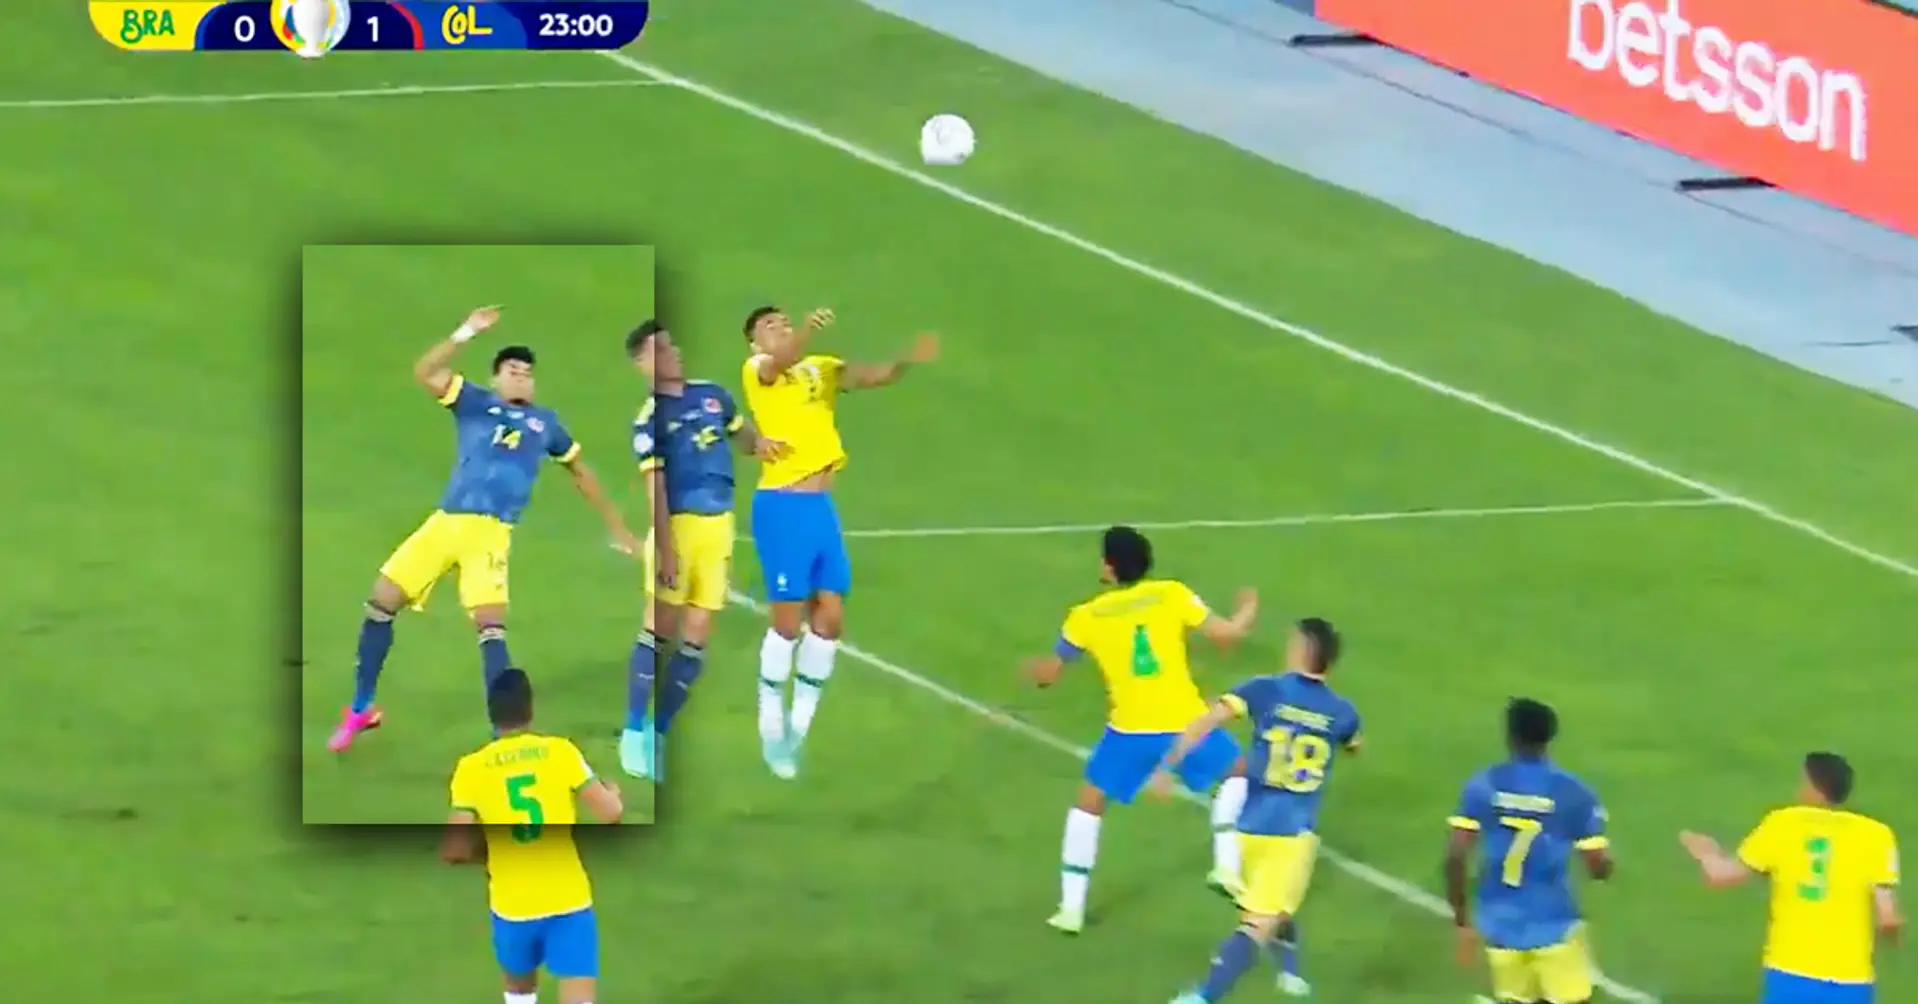 Puskas Award? Colombian player scores an insane goal against Brazil at Copa America